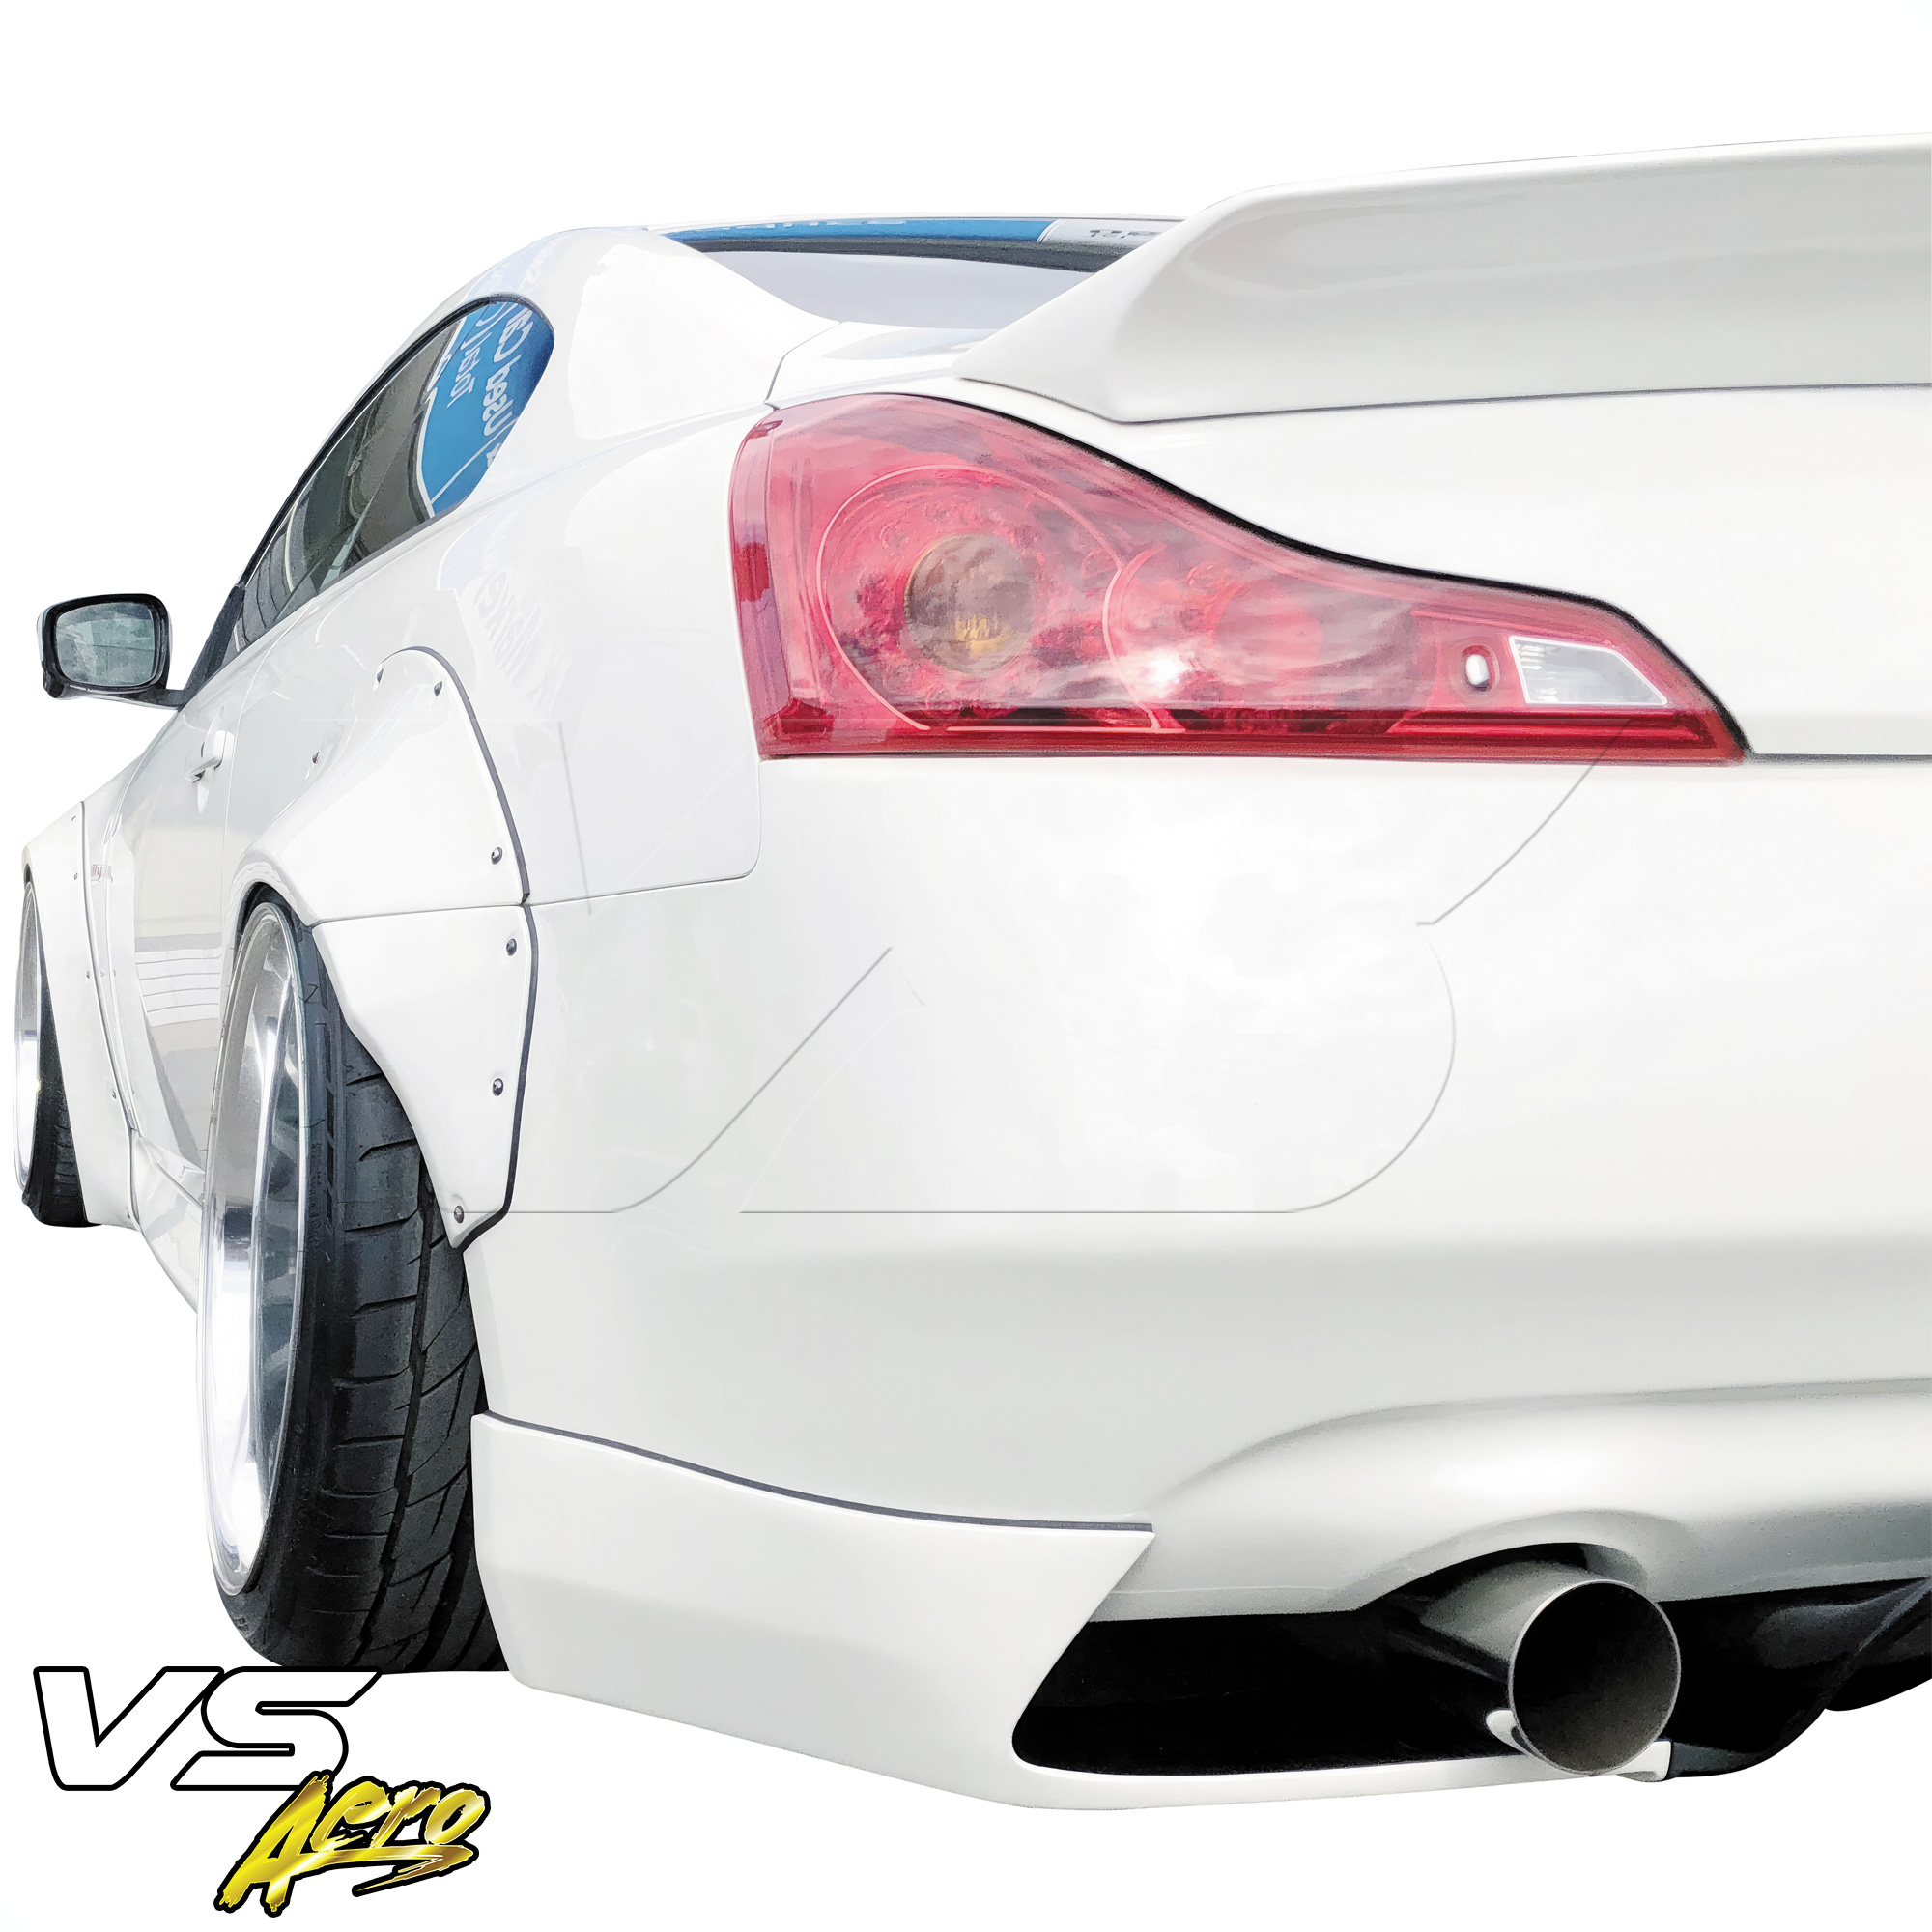 VSaero FRP LBPE Wide Body Fender Flares (rear) 4pc > Infiniti G37 Coupe 2008-2015 > 2dr Coupe - Image 32